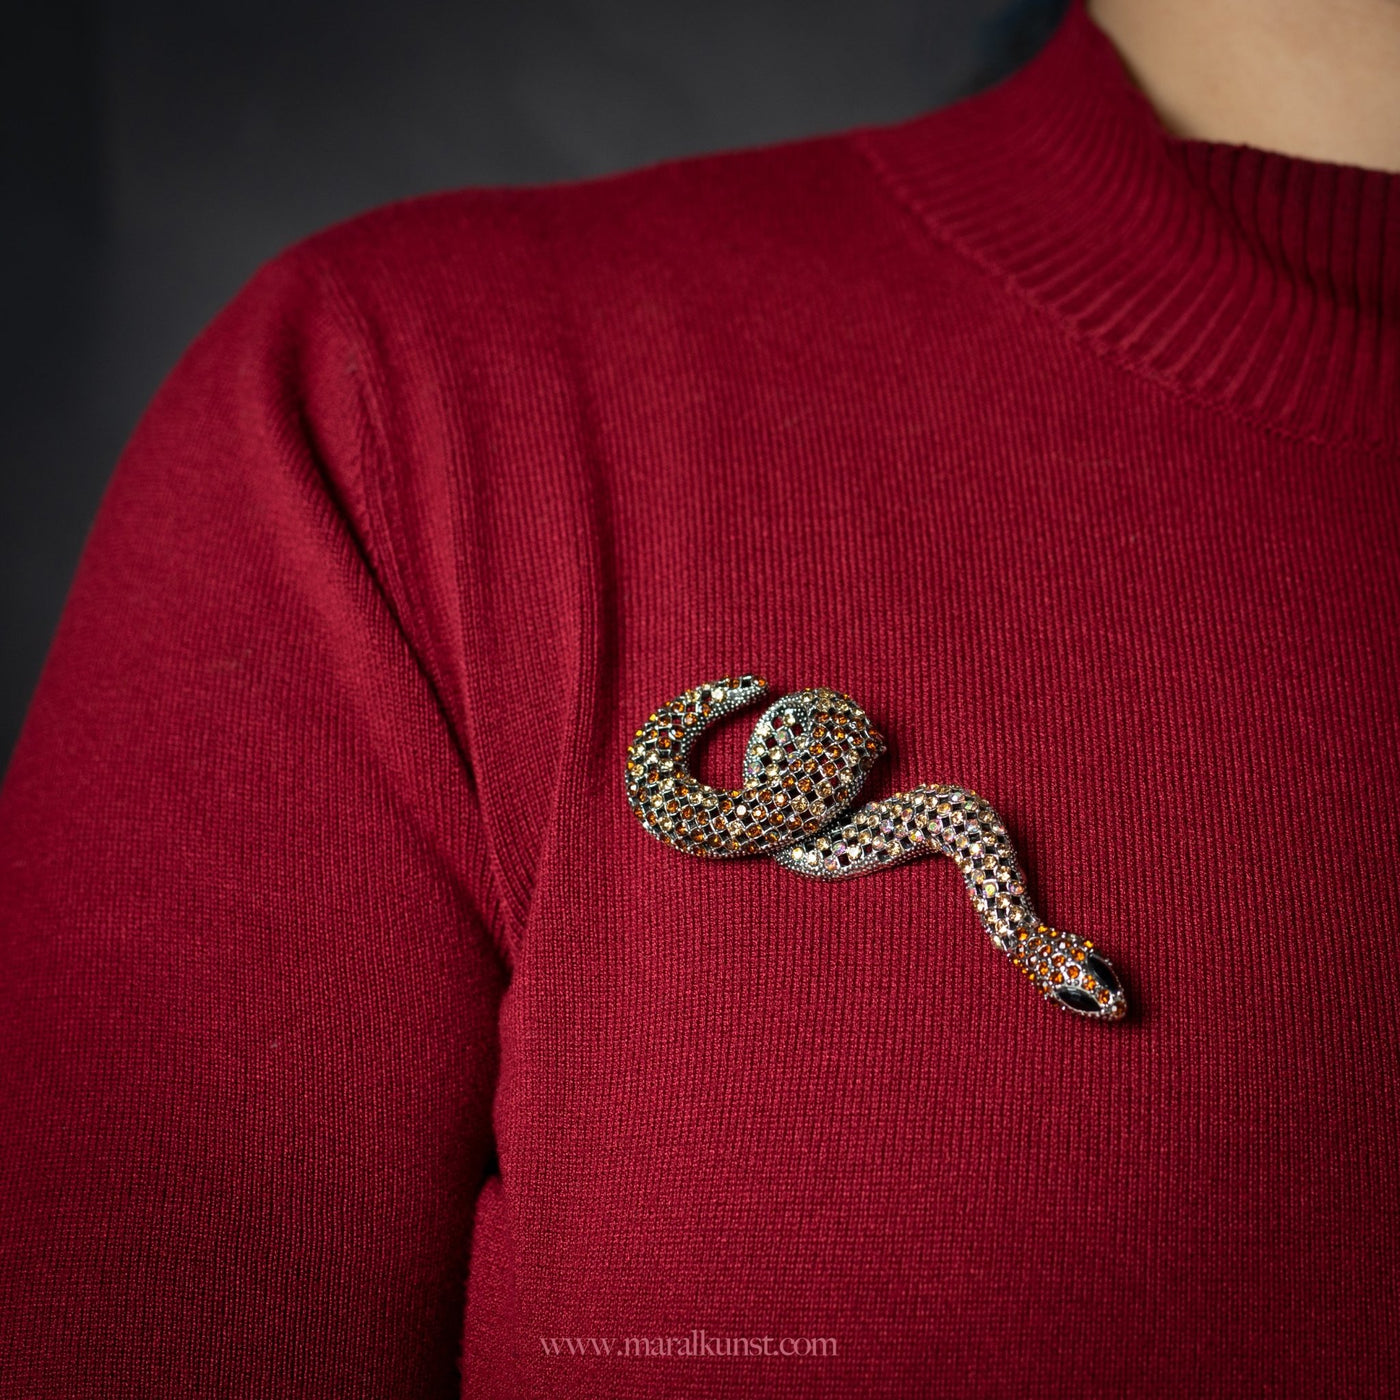 Exotic Snake Brooch - Maral Kunst Jewelry